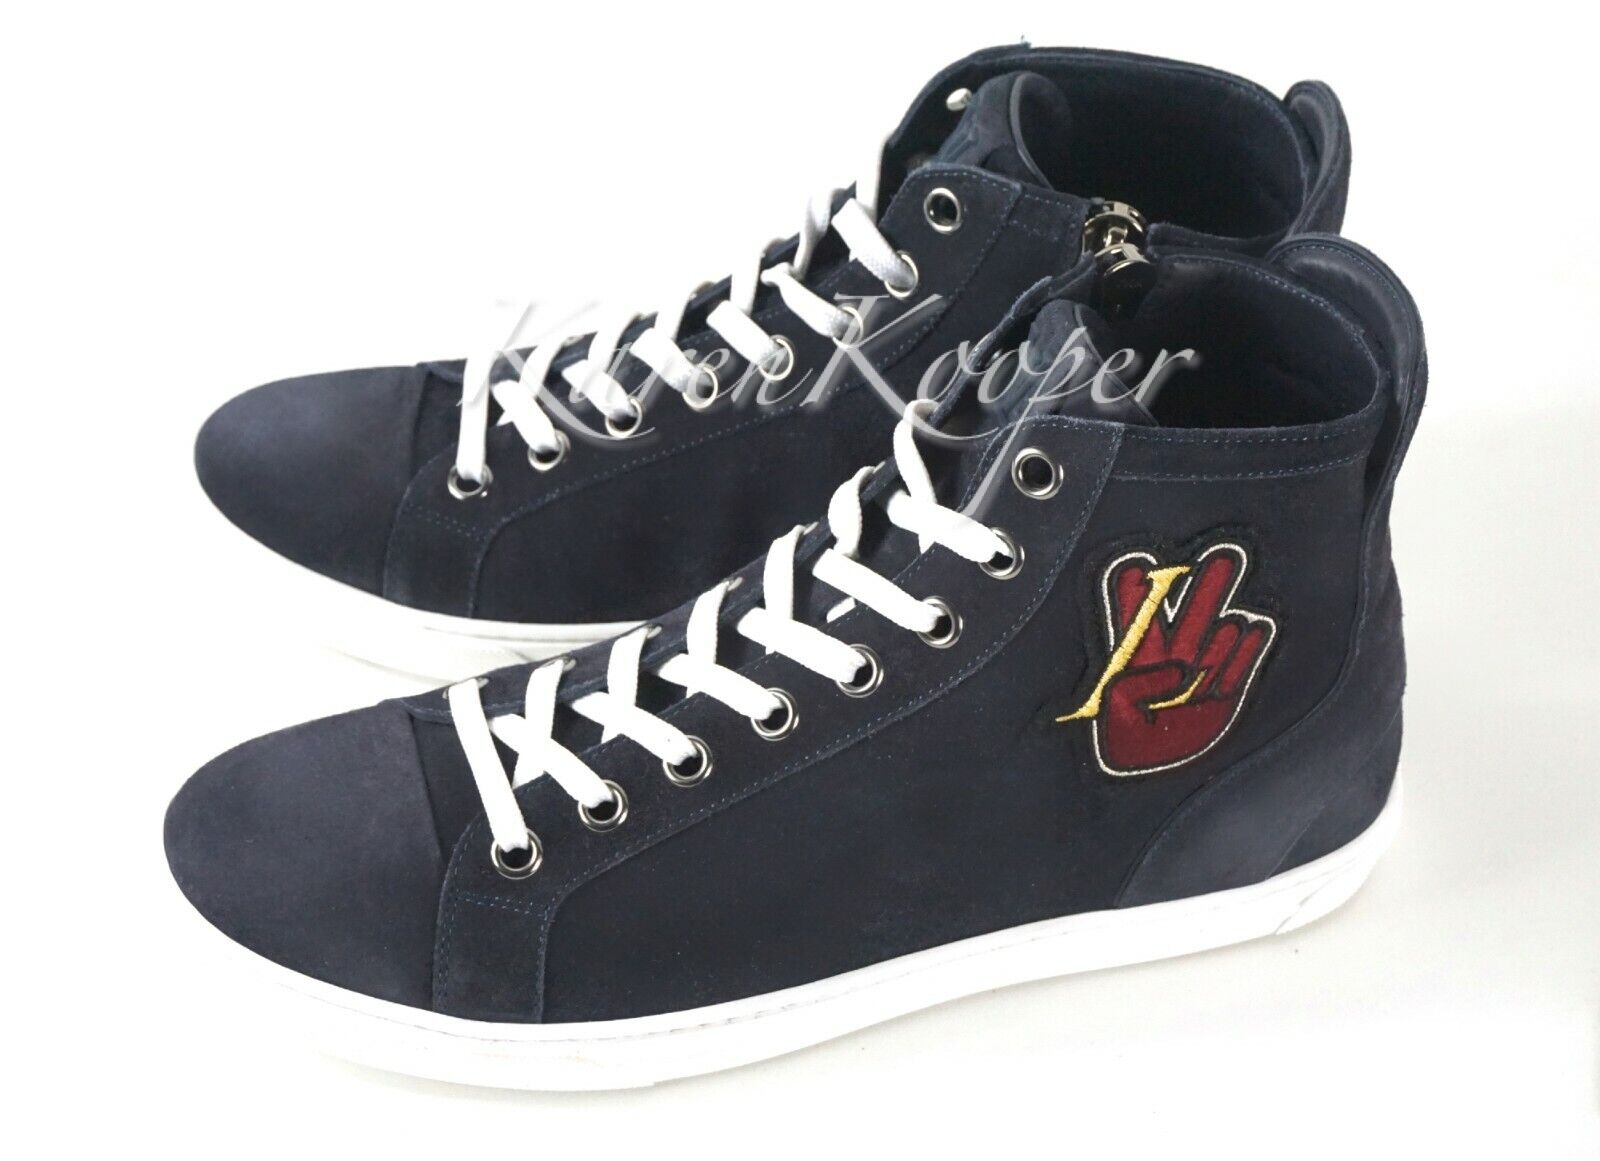 NEW AUTH LOUIS VUITTON ZIP UP MEN PEACE SIGN BLUE HIGH TOP SNEAKERS LV 7/8  US